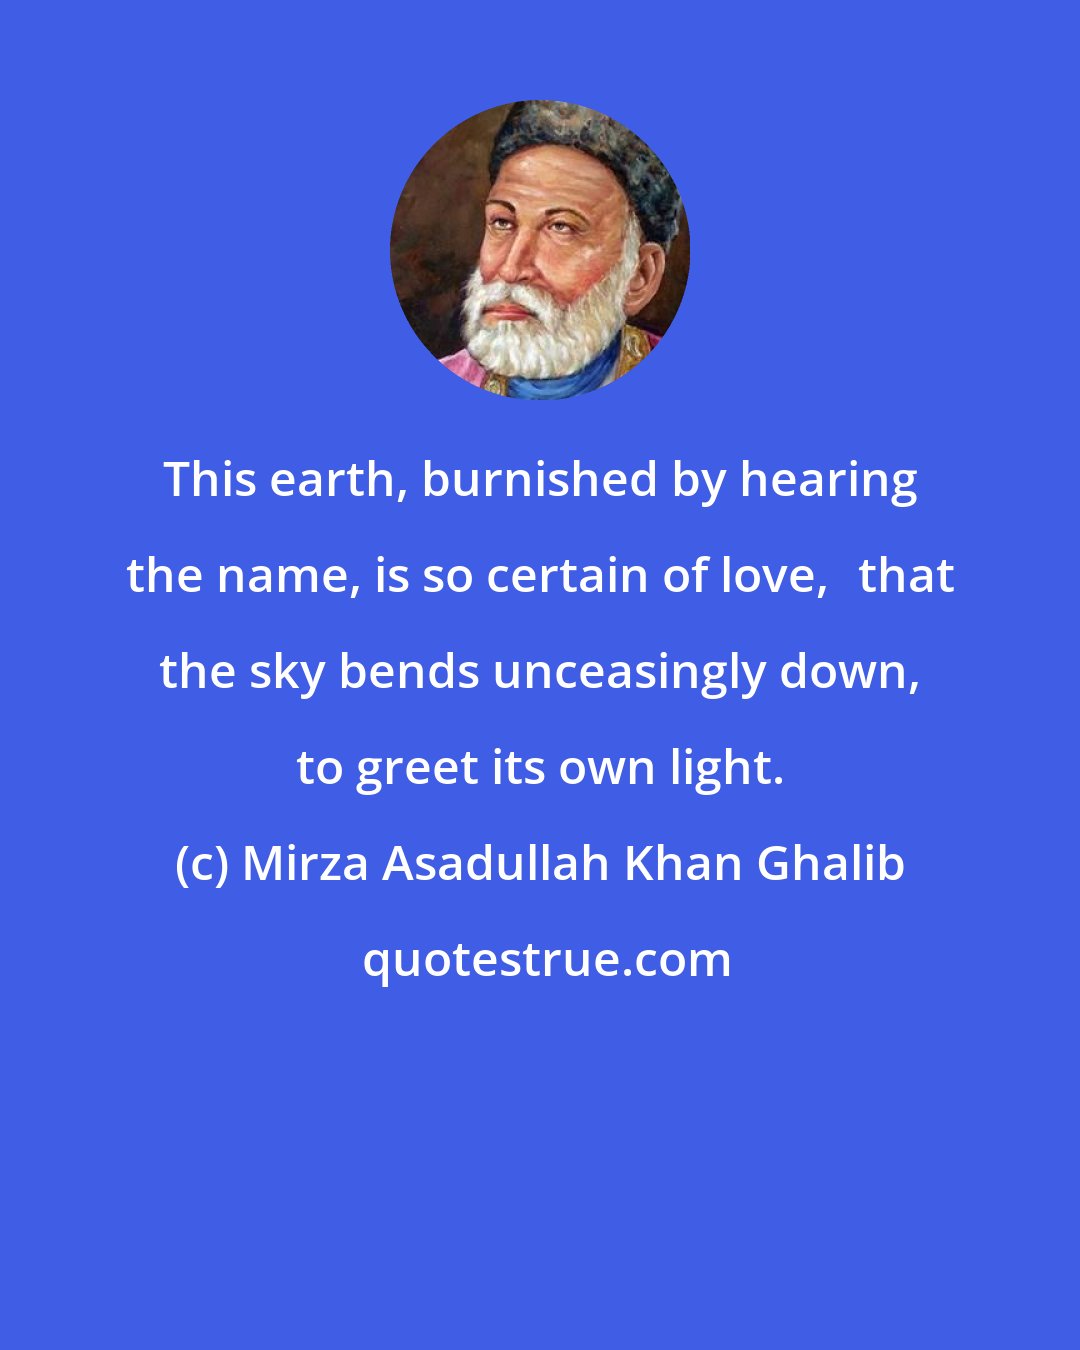 Mirza Asadullah Khan Ghalib: This earth, burnished by hearing the name, is so certain of love, that the sky bends unceasingly down, to greet its own light.